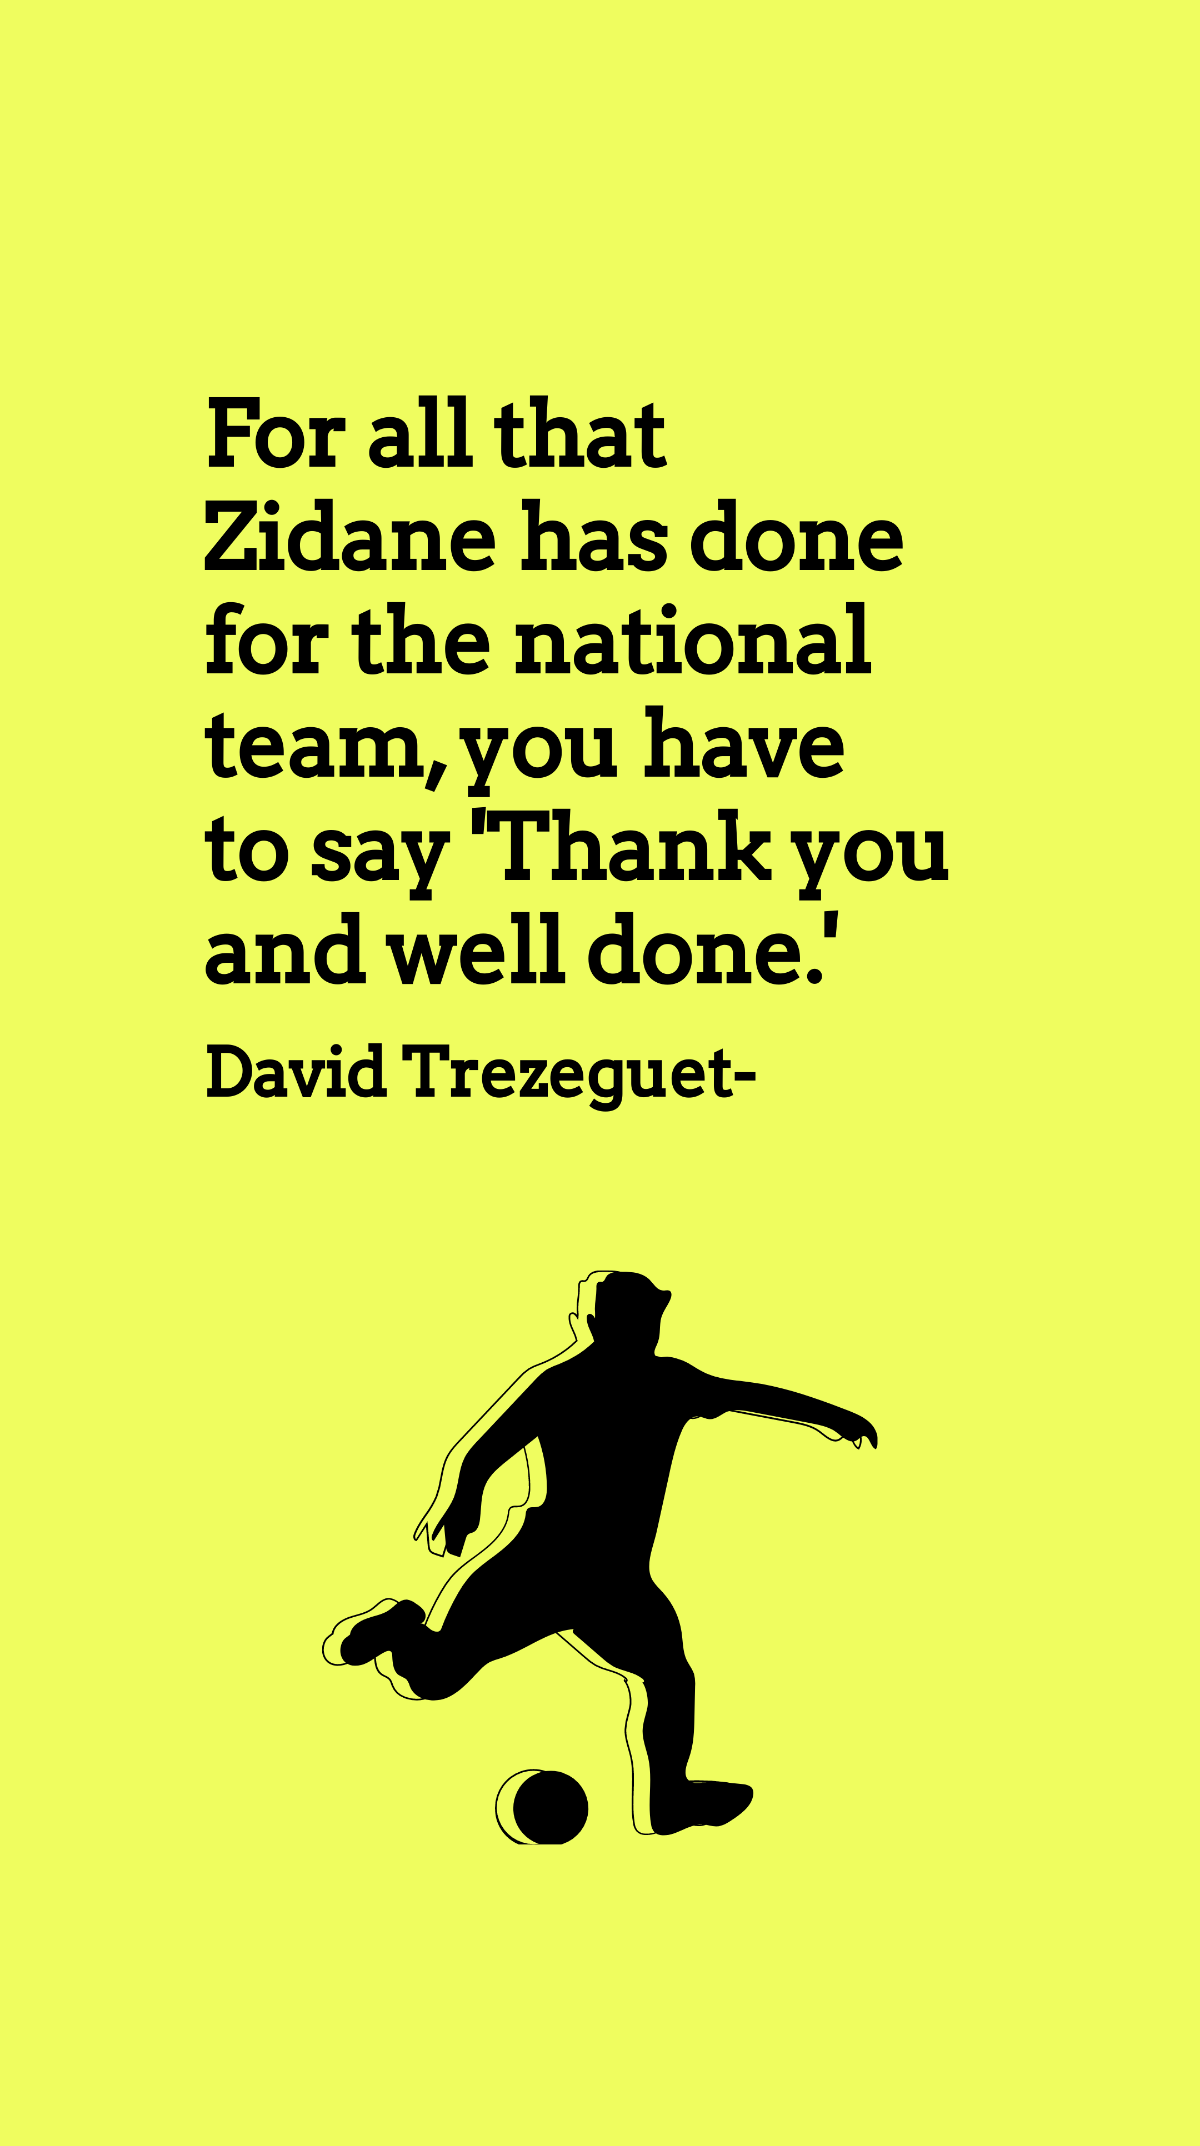 David Trezeguet - For all that Zidane has done for the national team, you have to say 'Thank you and well done.'  Template